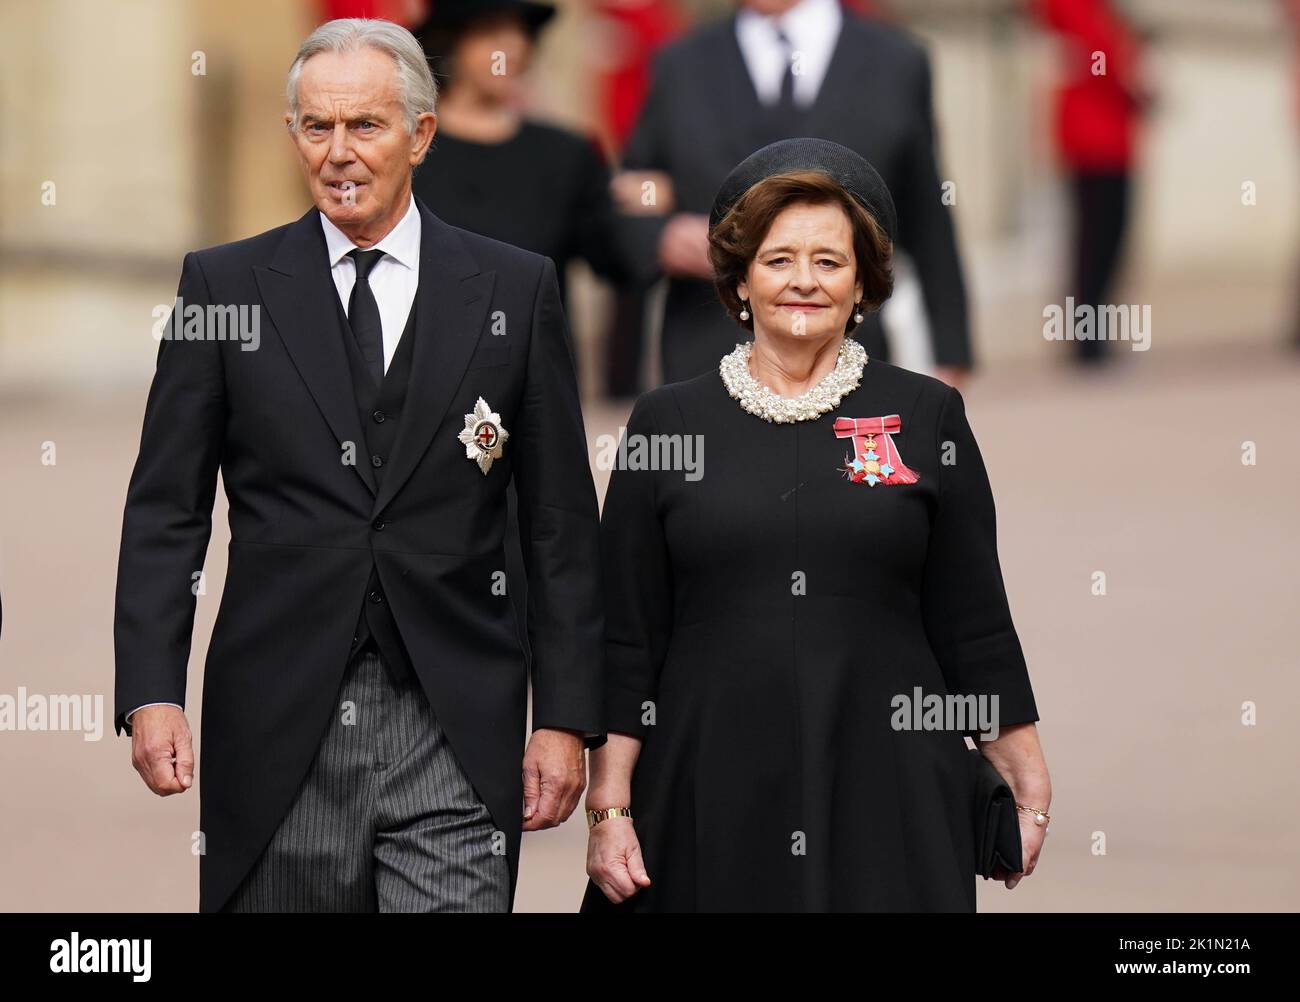 Former Prime Minister Sir Tony Blair and wife Cherie arrive for the Committal Service for Queen Elizabeth II held at St George's Chapel in Windsor Castle, Berkshire. Picture date: Monday September 19, 2022. Stock Photo